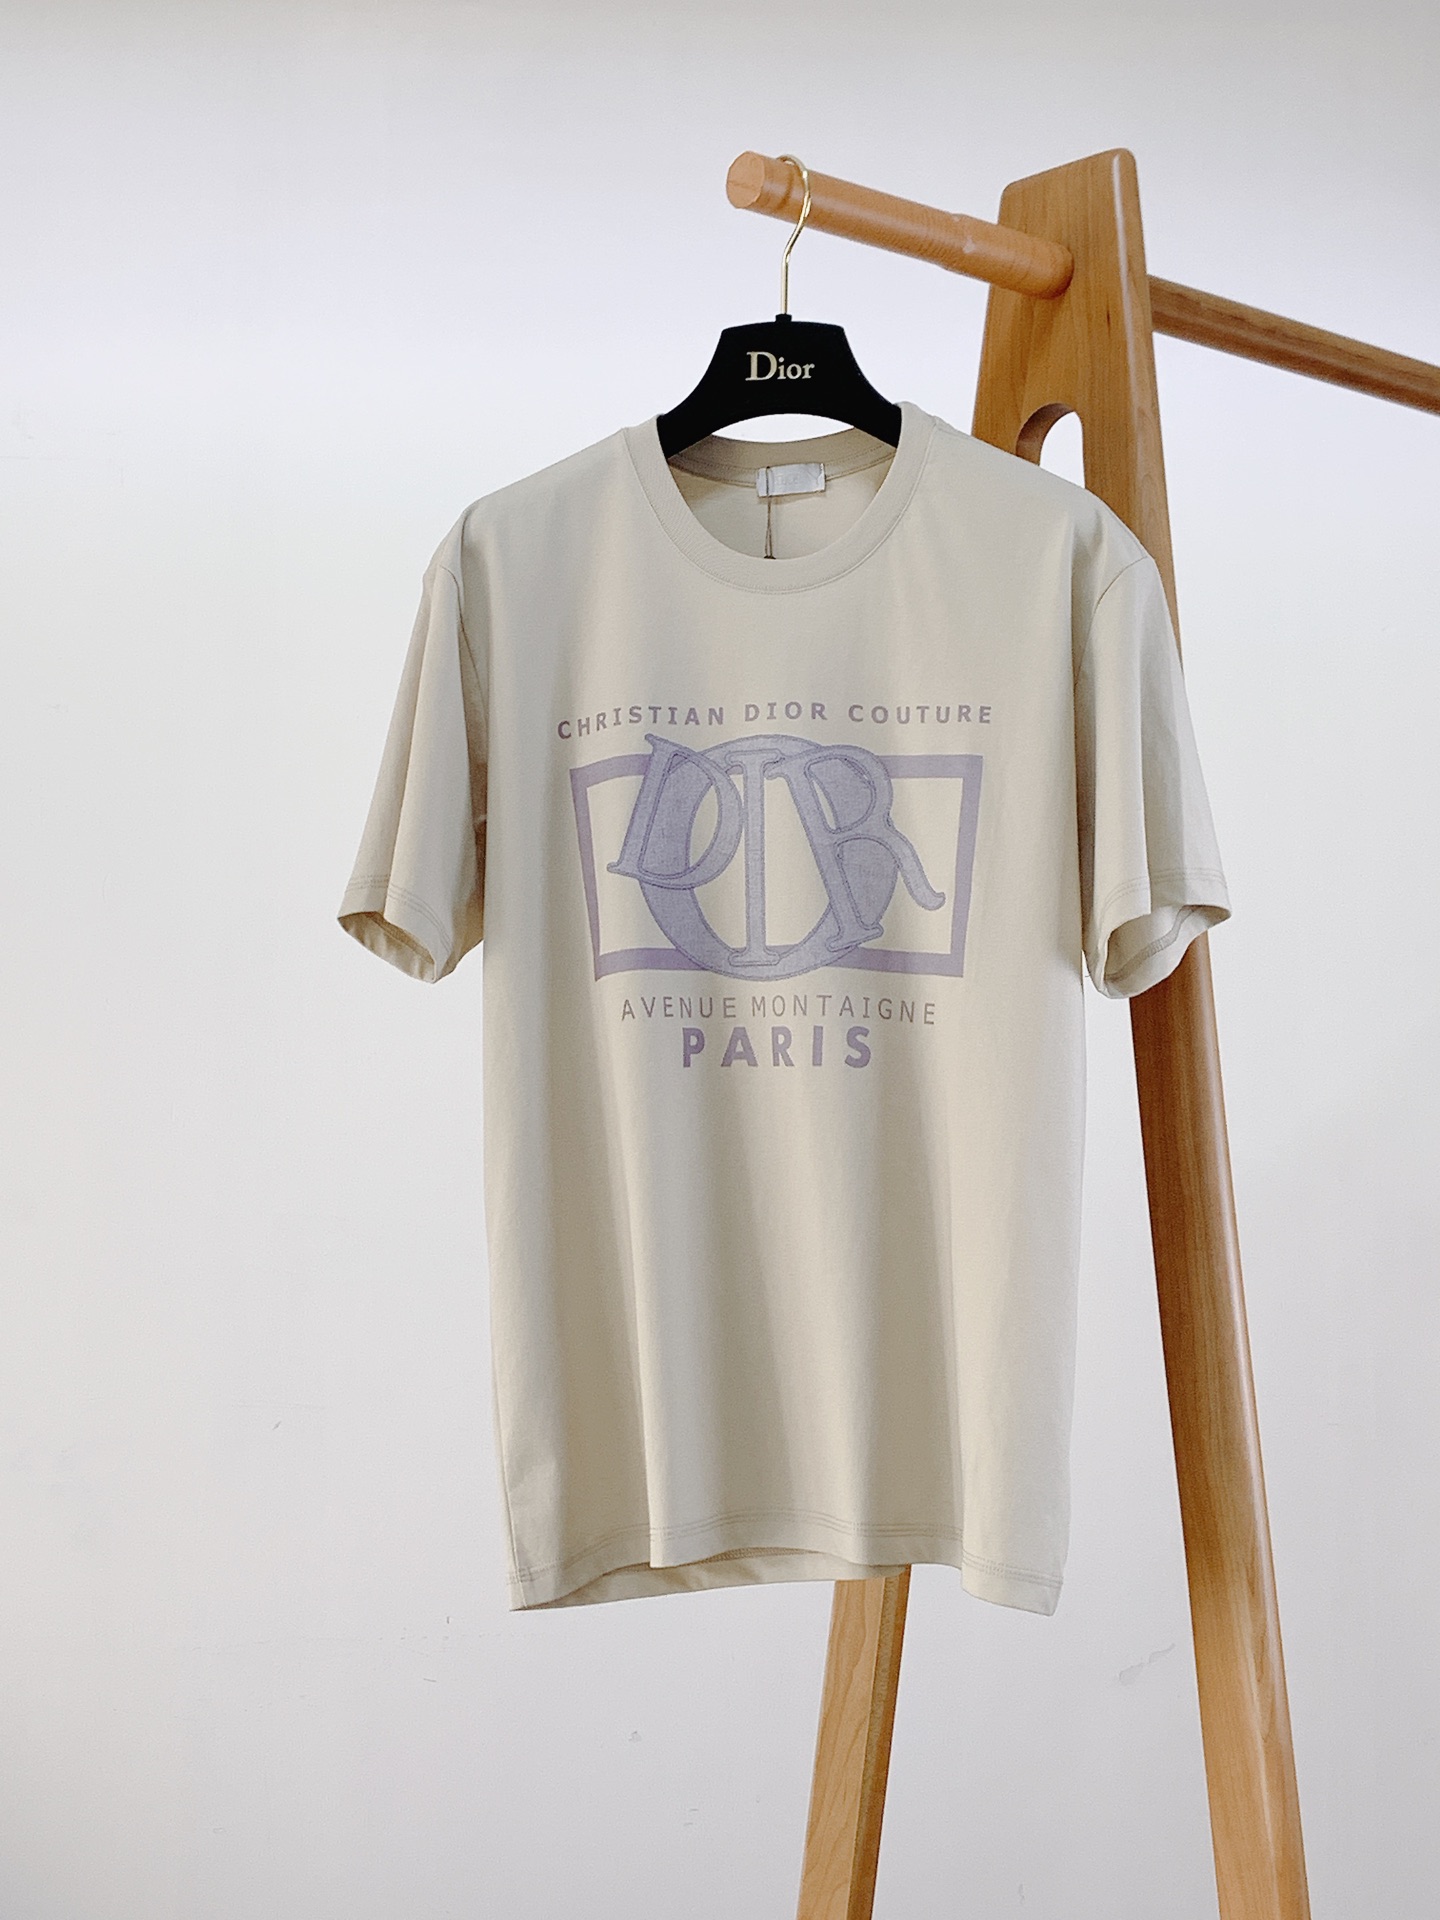 Dior Clothing T-Shirt White Men Spring/Summer Collection Casual